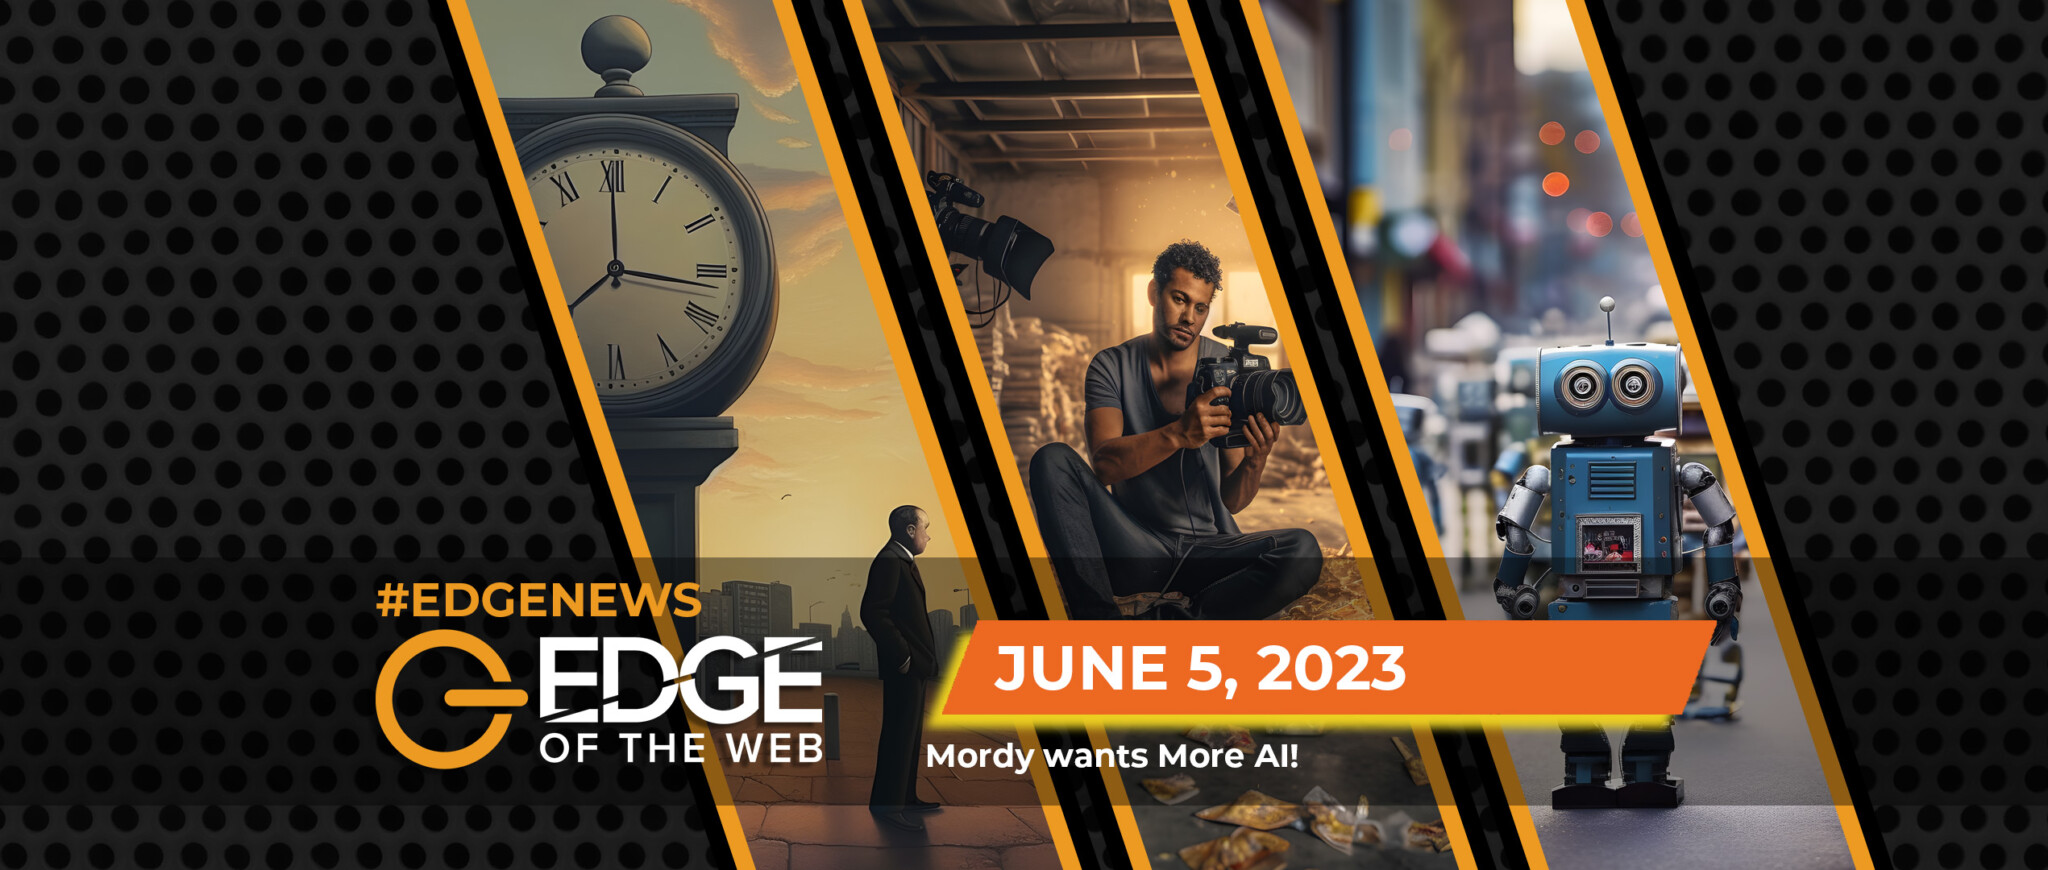 598 | News from the EDGE | Week of 6.5.2023